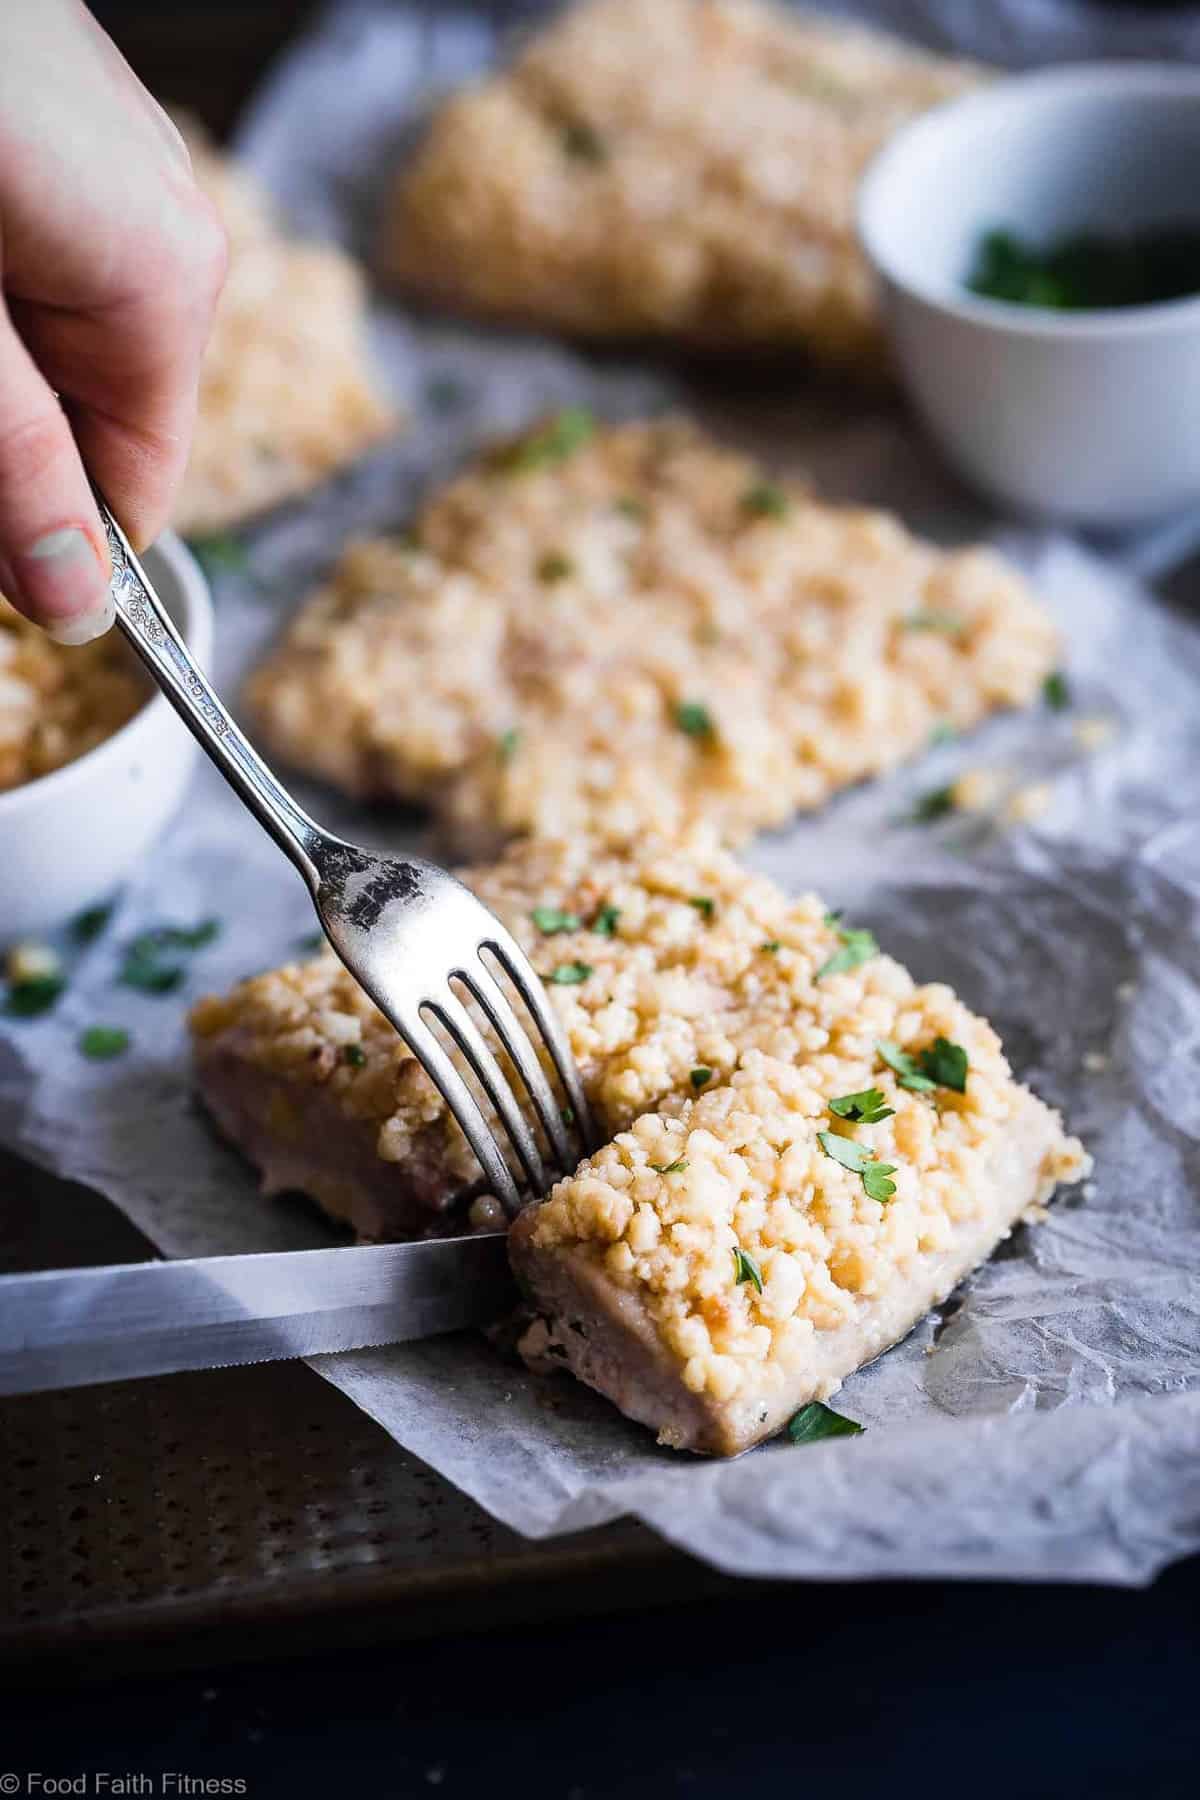 3 Ingredient Macadamia Nut Mahi Mahi - This oven baked mahi mahi is a quick and easy healthy dish with only 3 ingredients! Keto, Whole30 and paleo friendly and SO tasty! You definitely want this recipe in your back pocket for busy weeknights! | #Foodfaithfitness | #Whole30 #Paleo #Healthy #Glutenfree #Keto